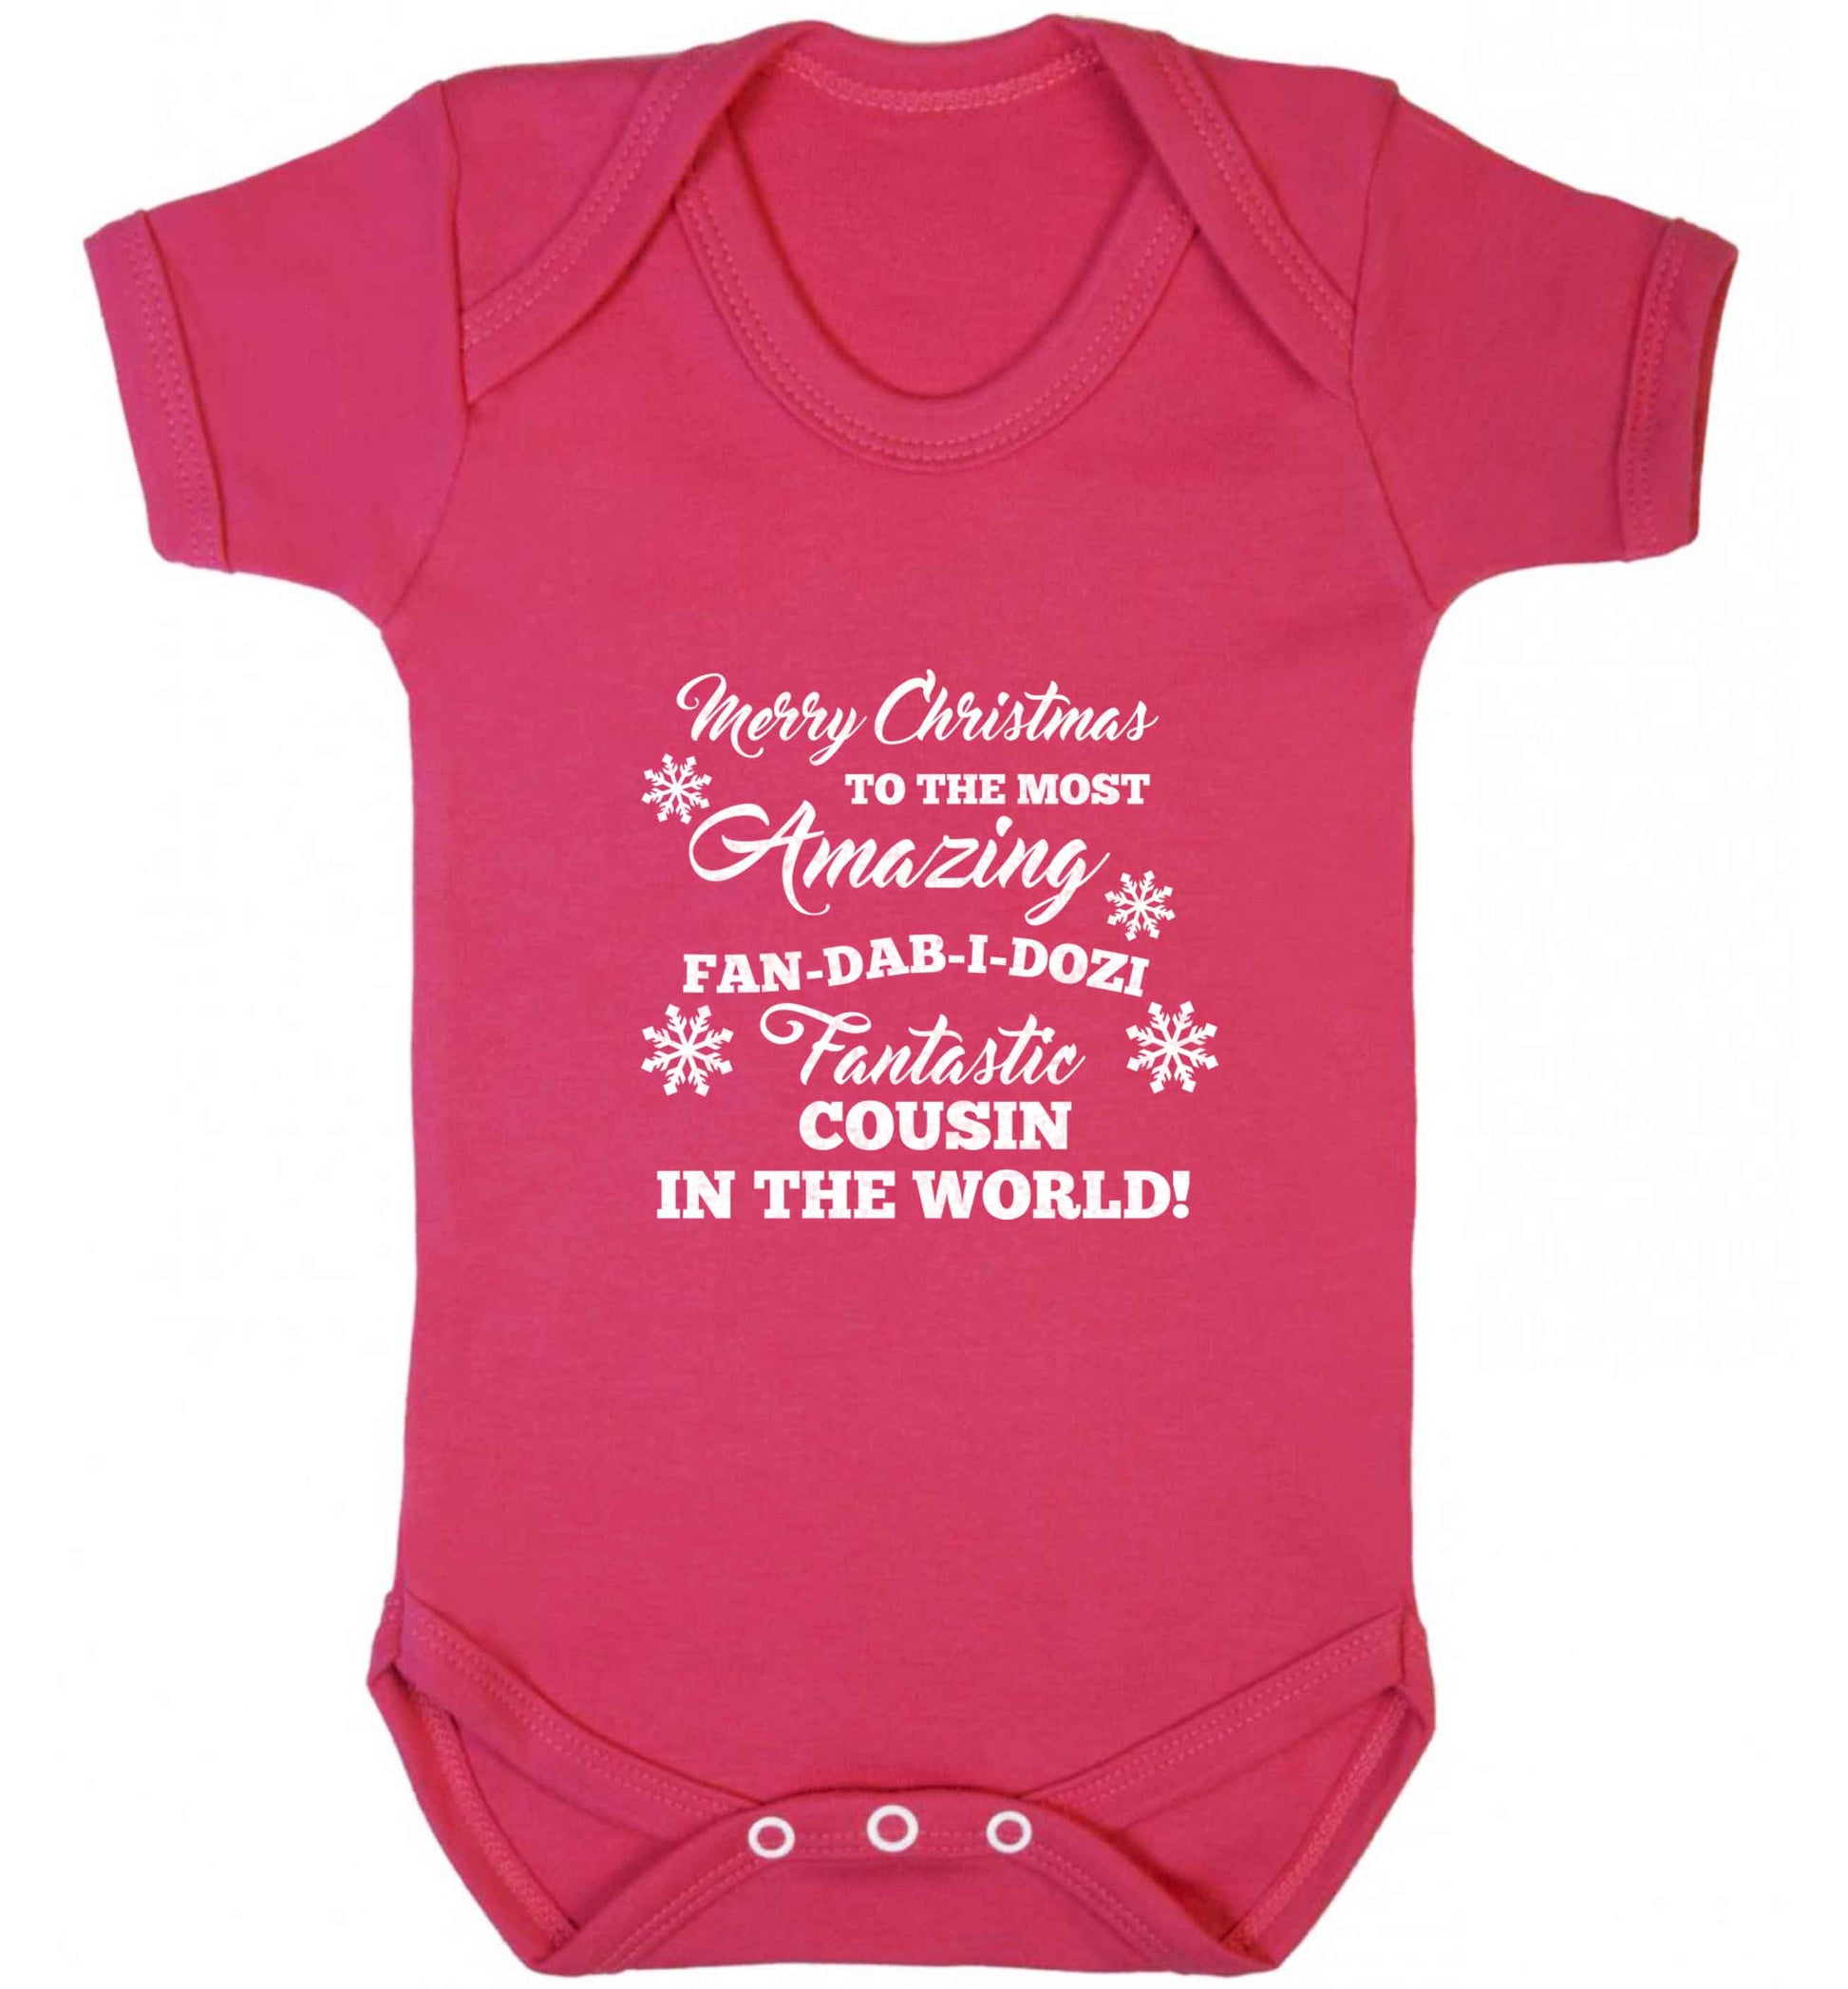 Merry Christmas to the most amazing fan-dab-i-dozi fantasic Cousin in the world baby vest dark pink 18-24 months